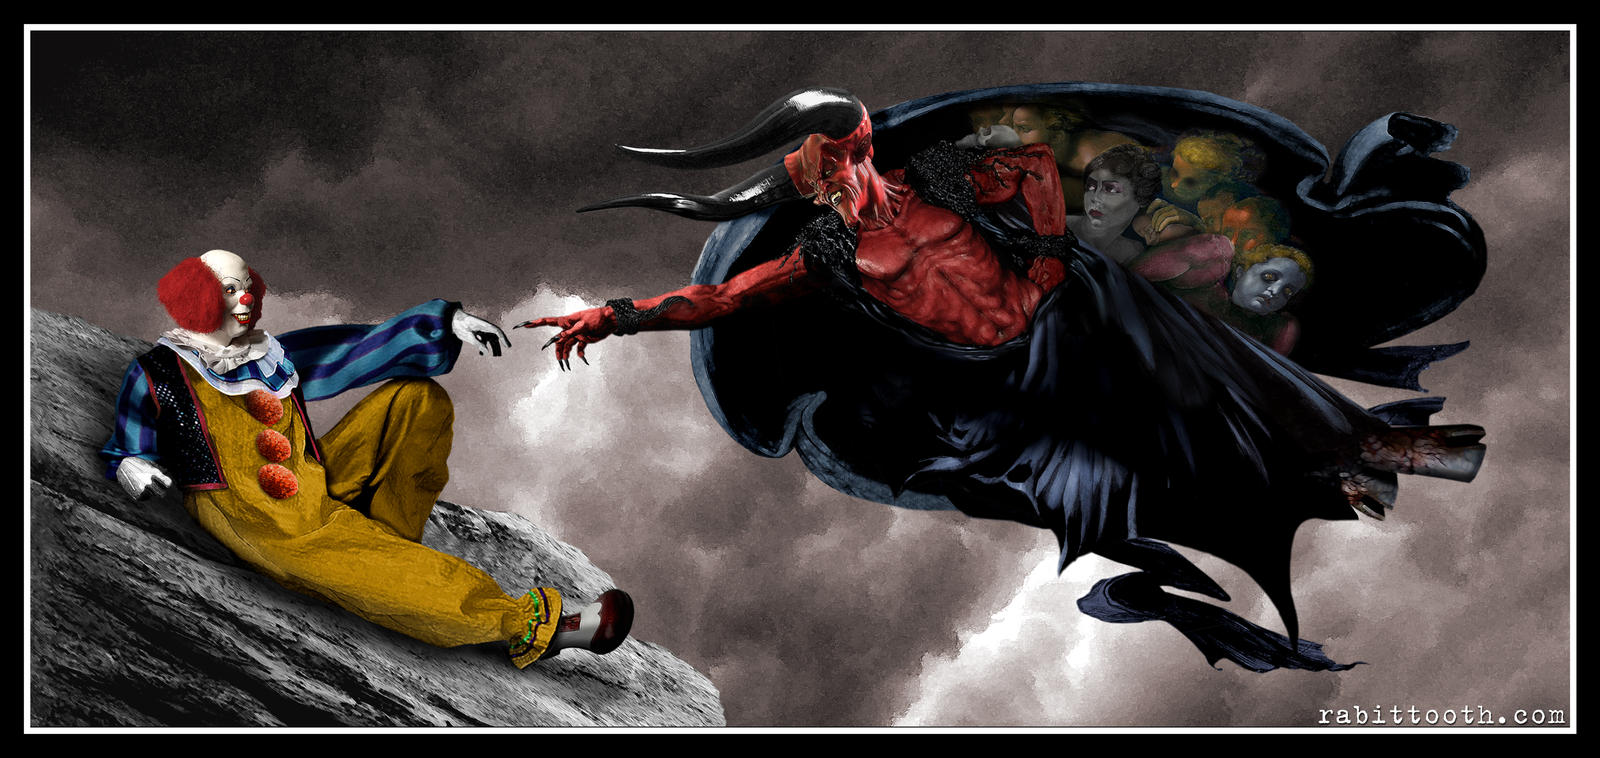 the_creation_of_pennywise__michelangelo_it_legend__by_rabittooth-d5zgbw7.jpg